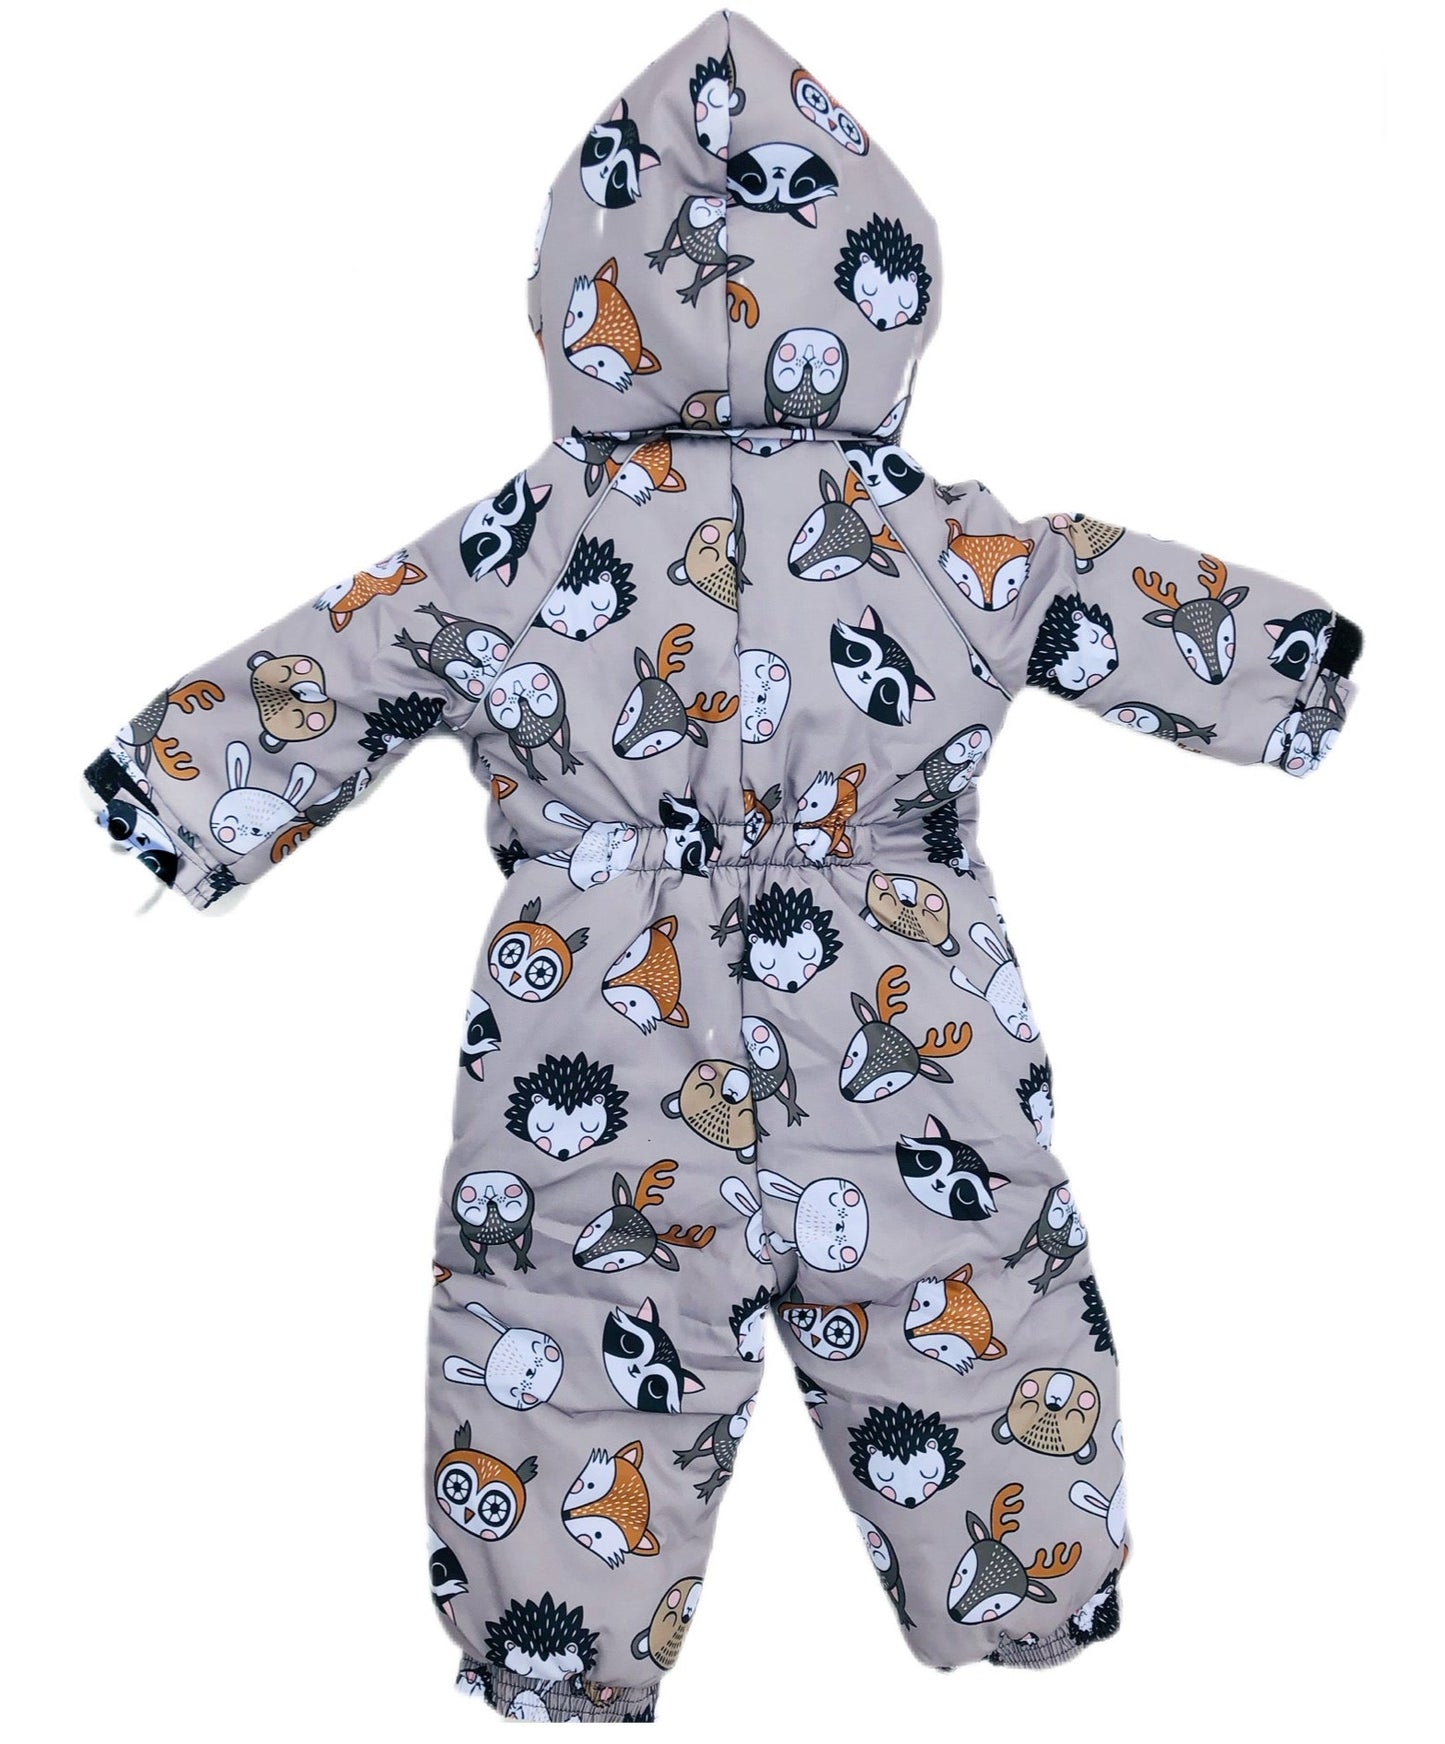 Unisex Toddler Winter Coverall with Hood. Animals heads patterned